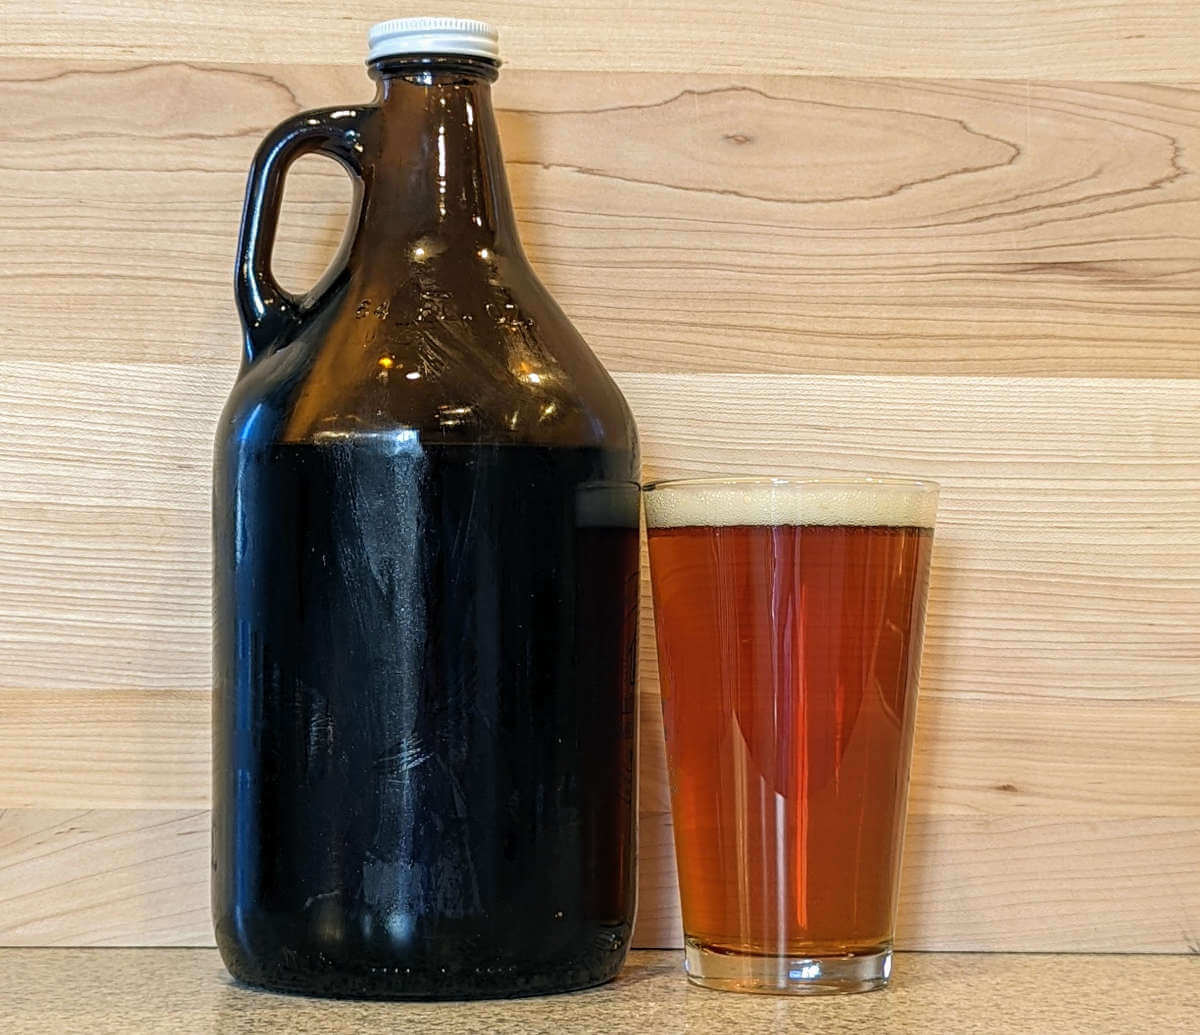 Latest print article: Blonde stout with Worthy Brewing